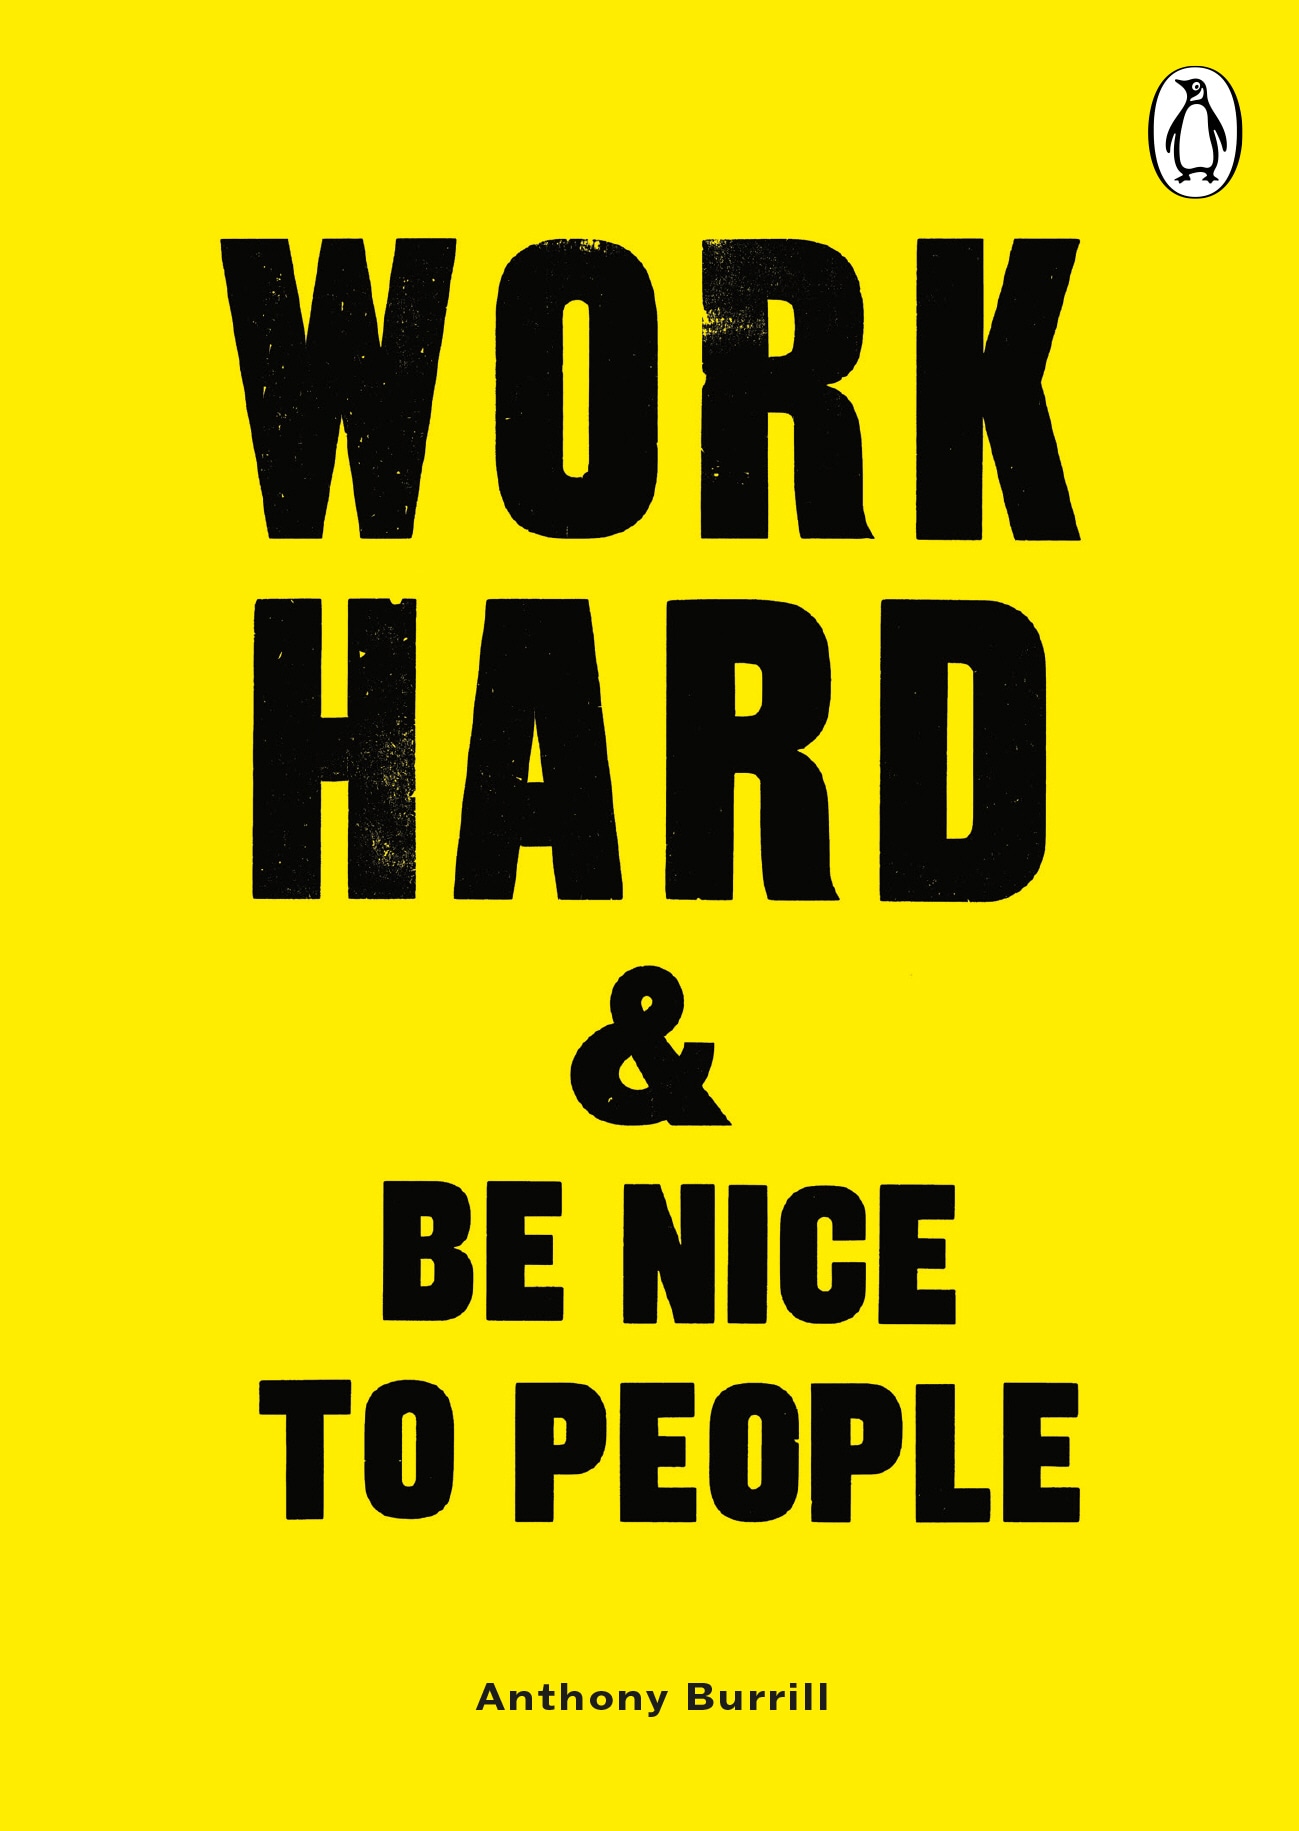 Book “Work Hard & Be Nice to People” by Anthony Burrill — August 13, 2020